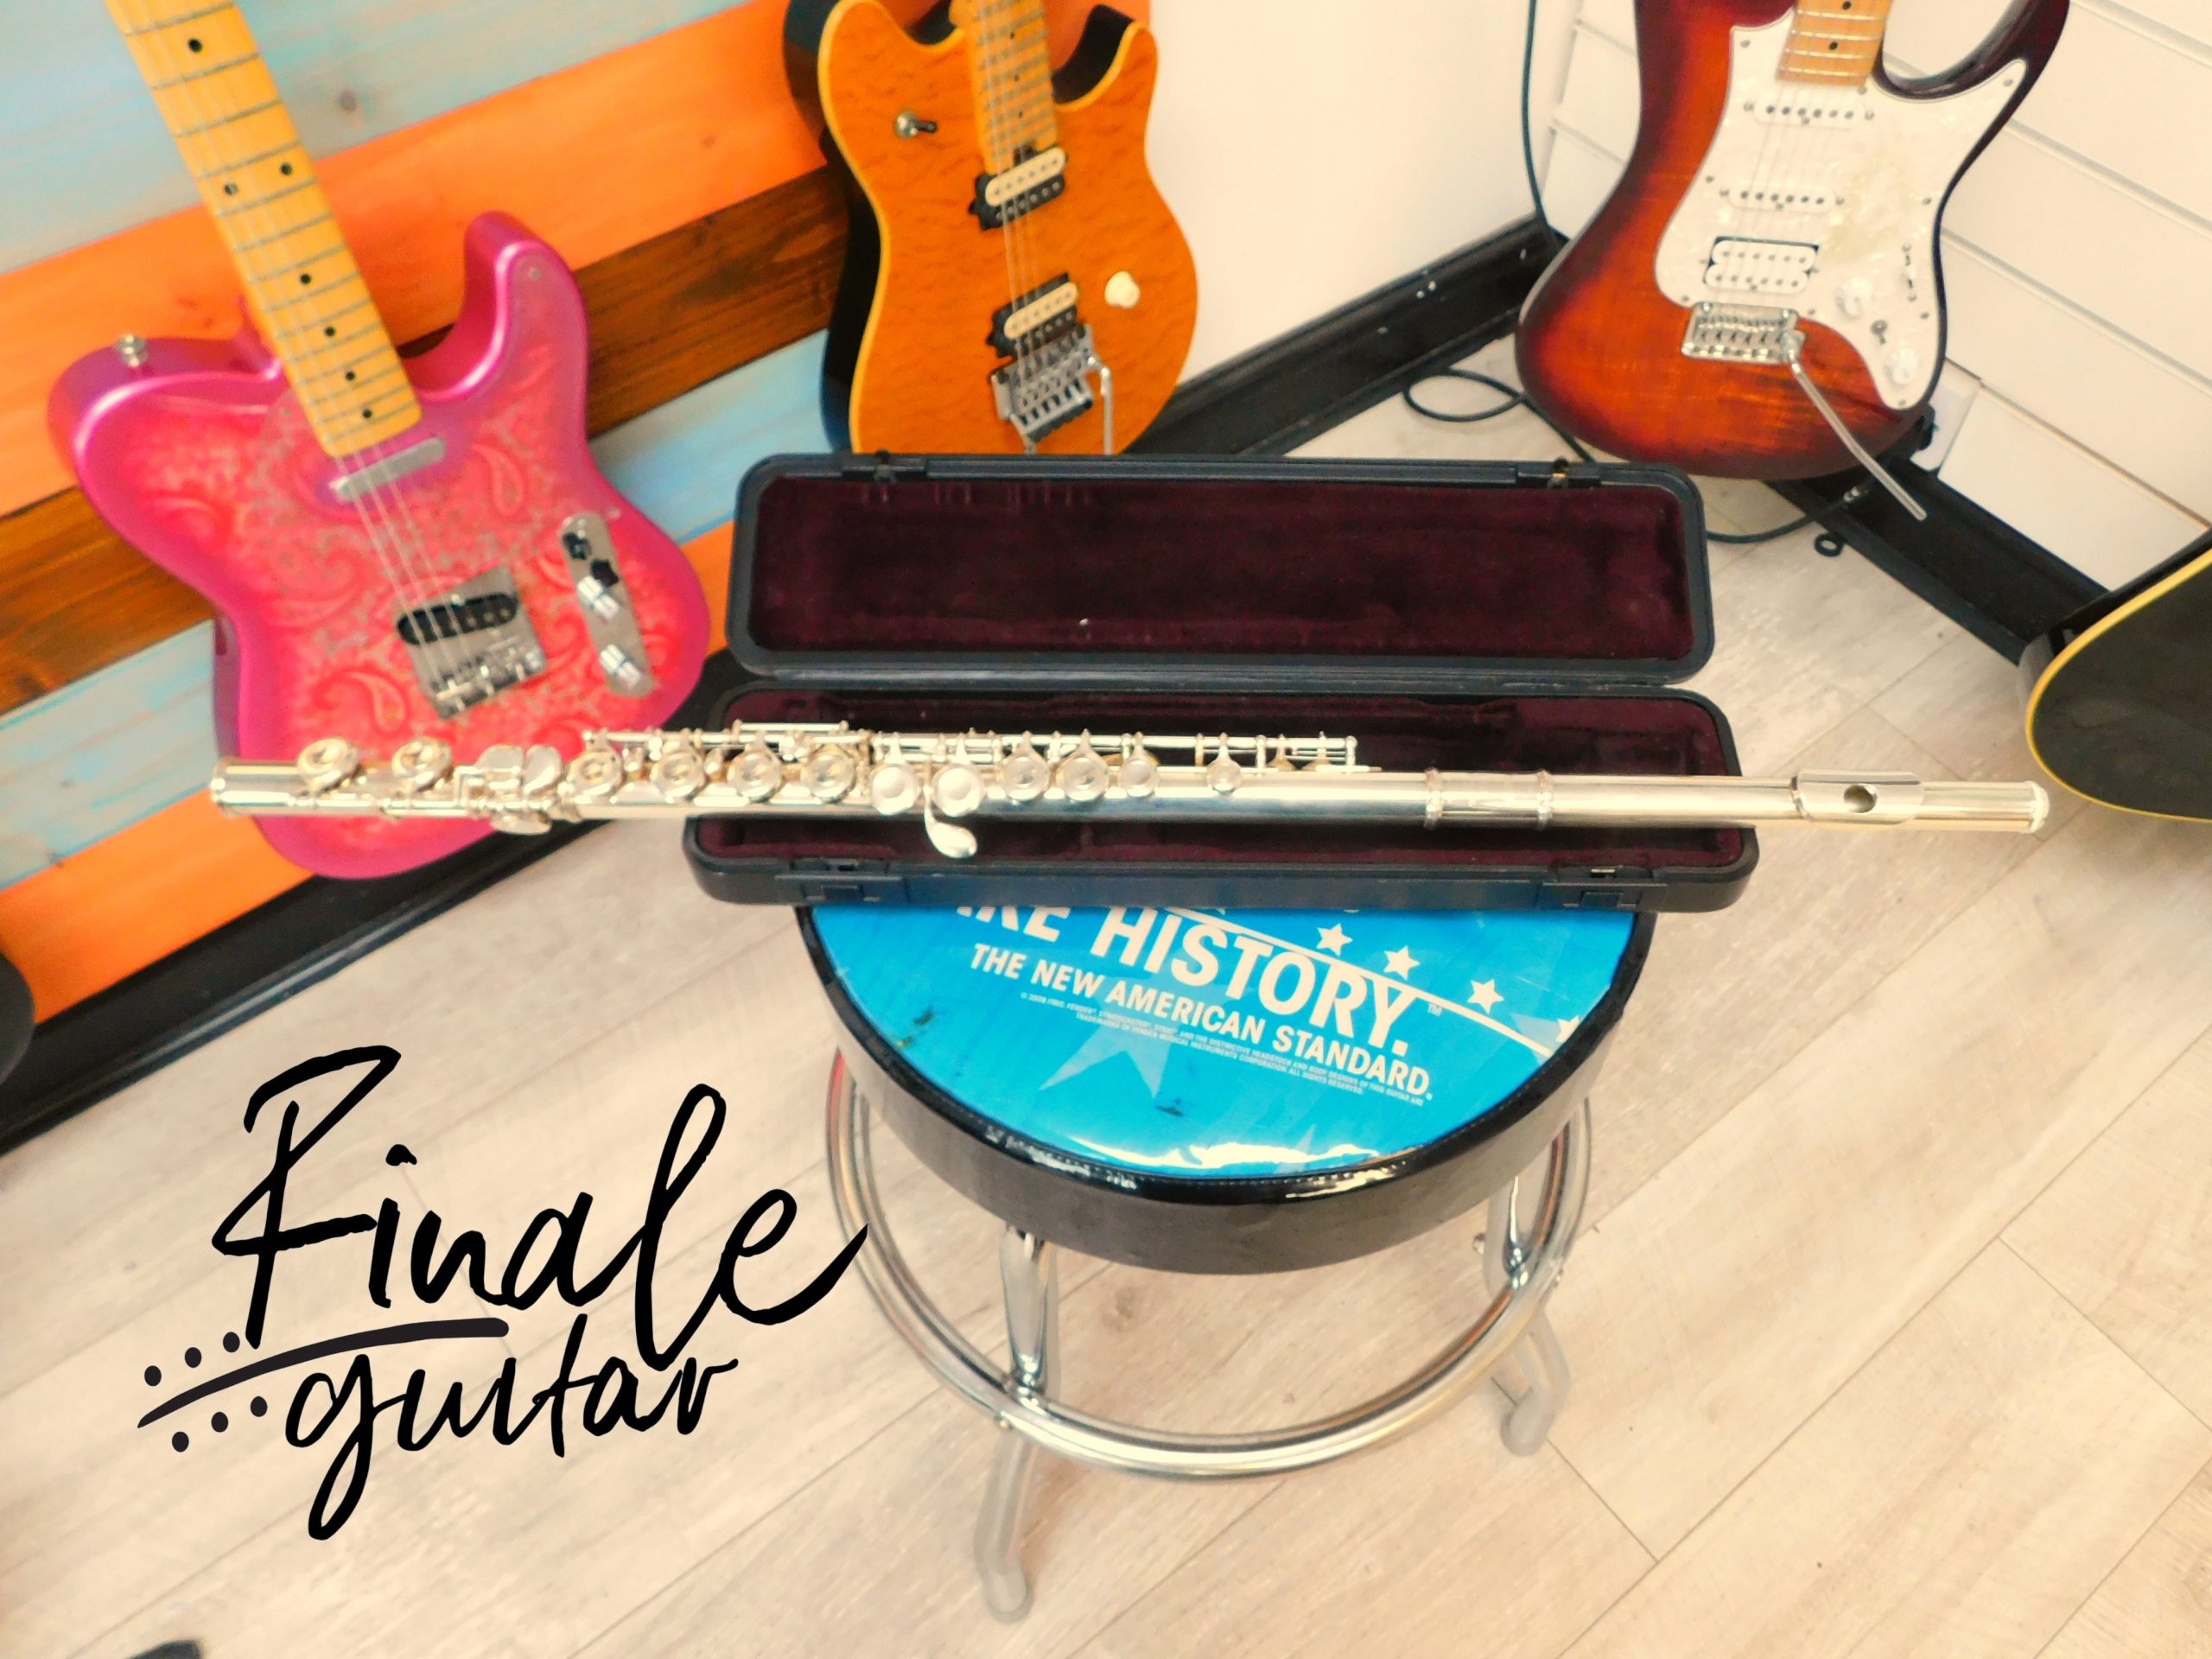 Flute Yamaha 211 (made in Japan) with case for sale in our Sheffield guitar shop, Finale Guitar